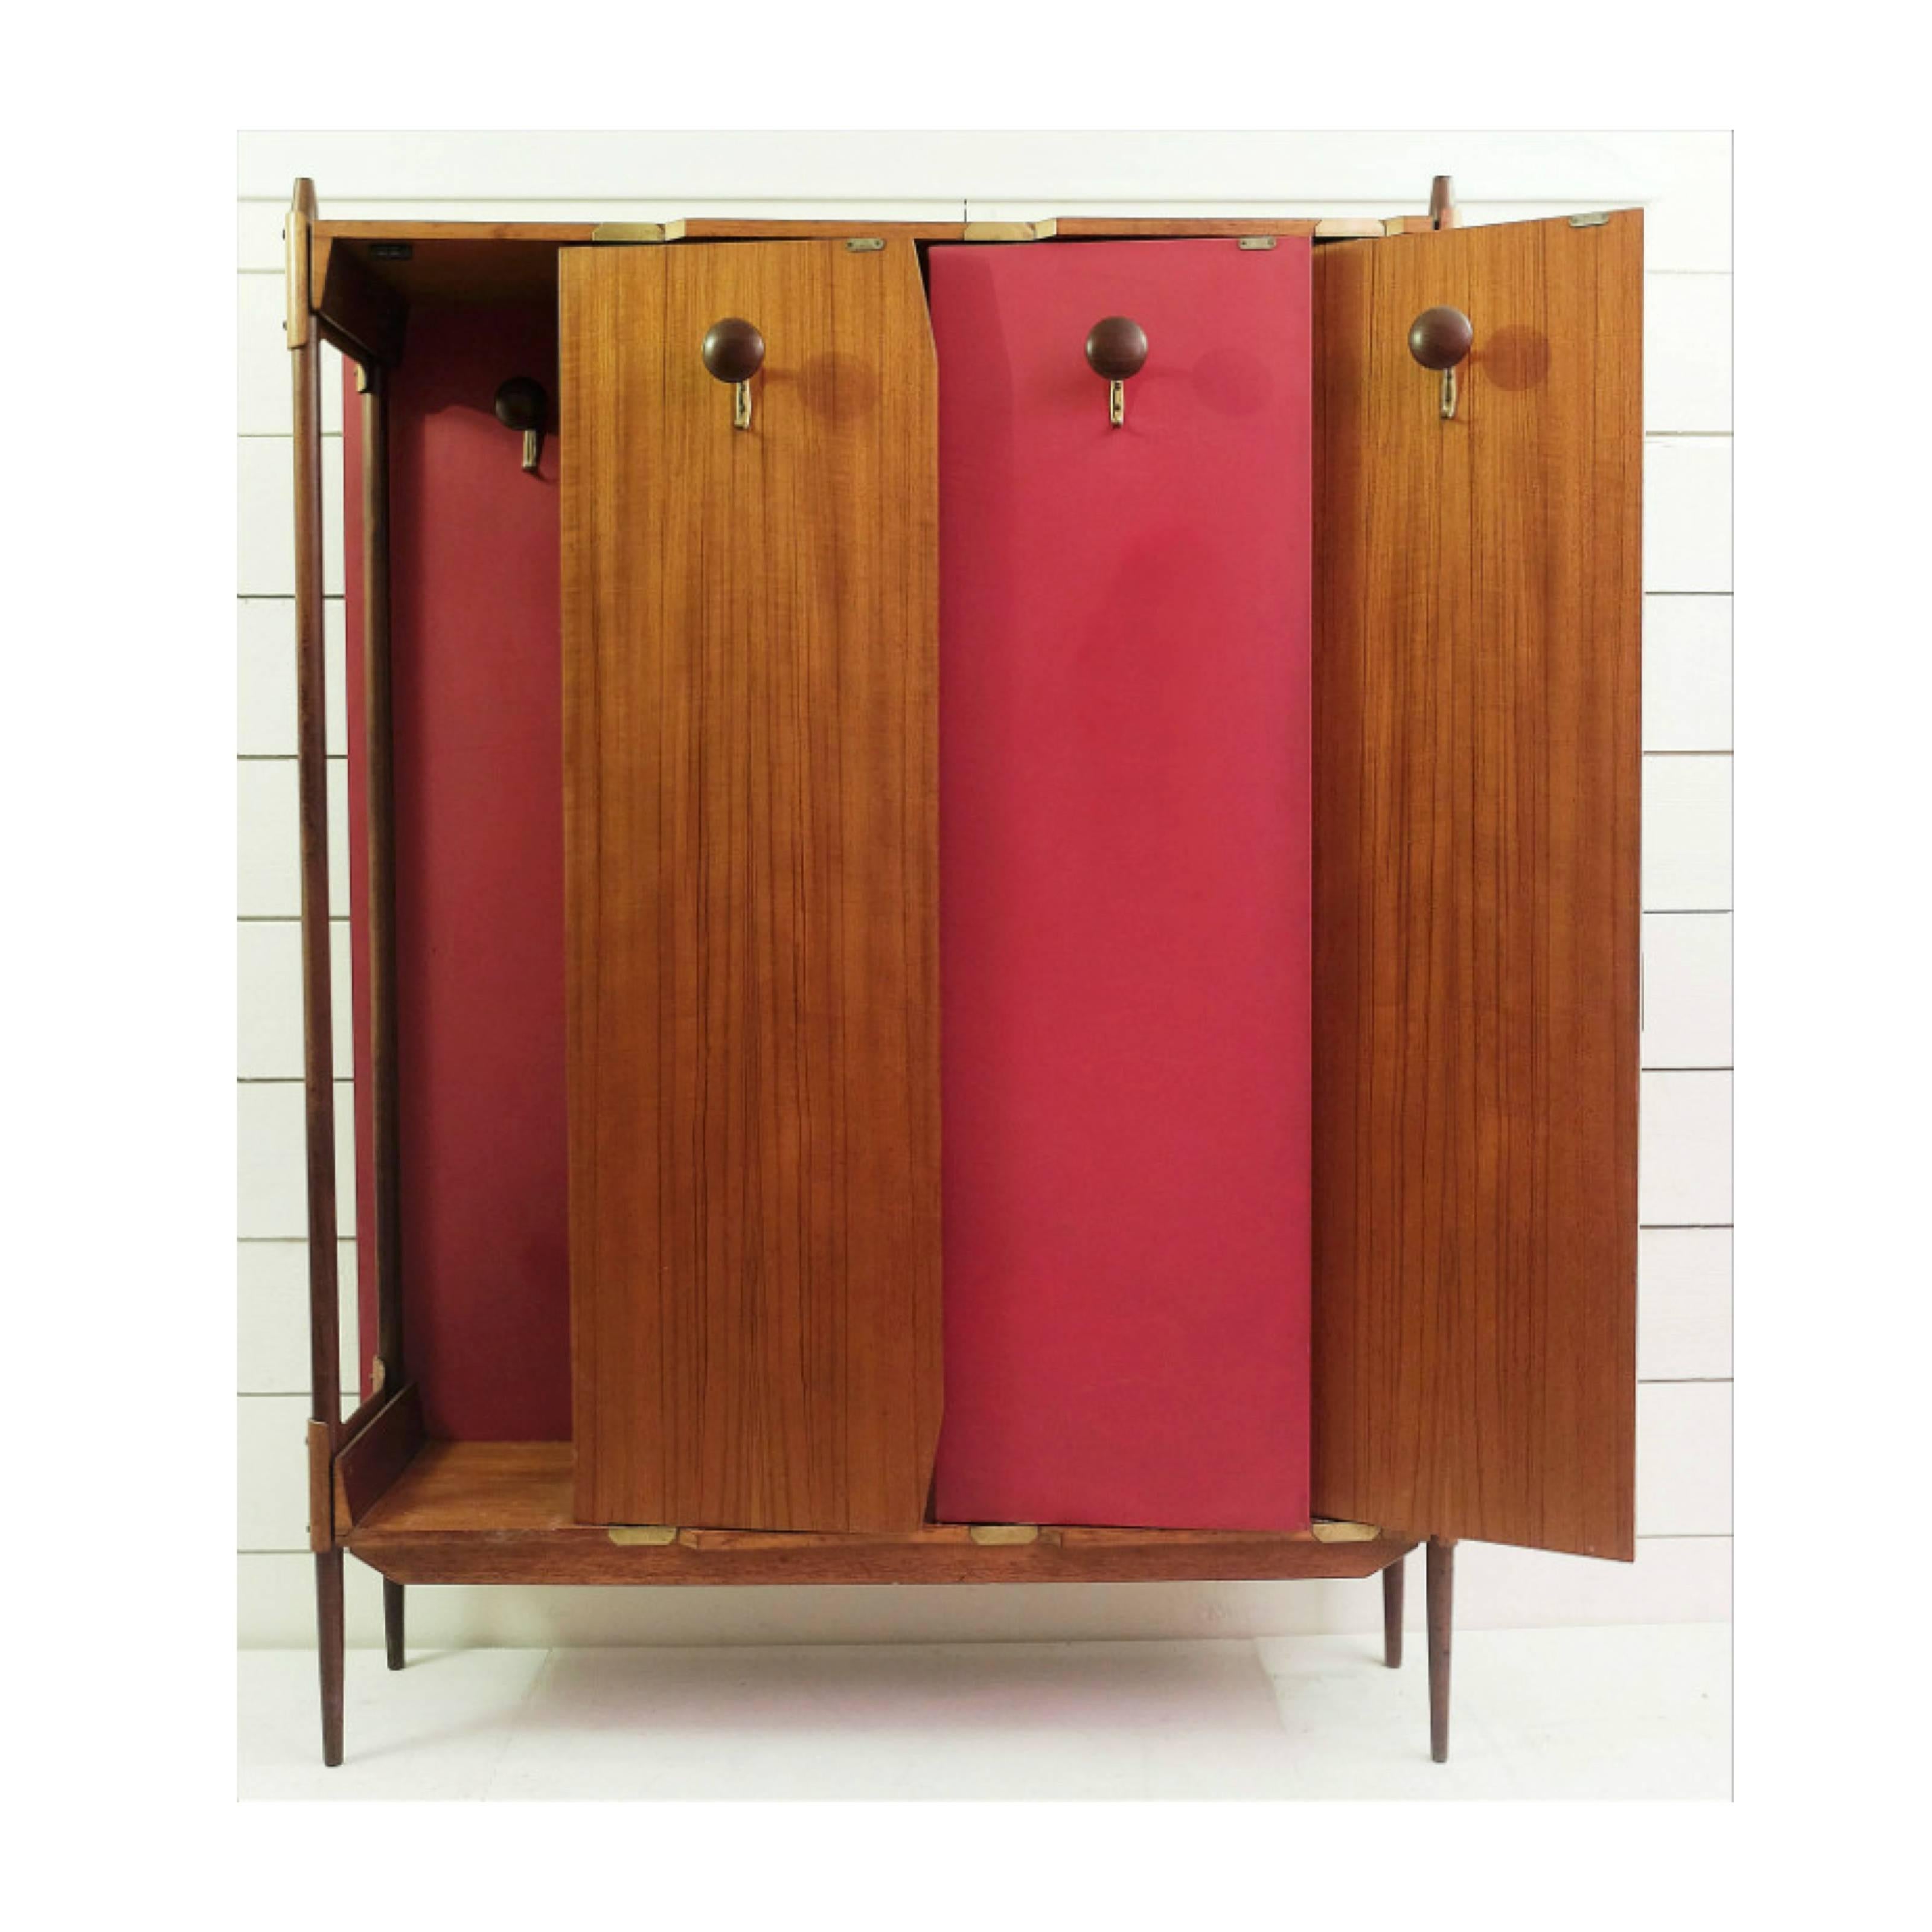 Entry way coat cupboard attributed to Castiglioni, Italy, circa 1950.

In plywood and moleskine.